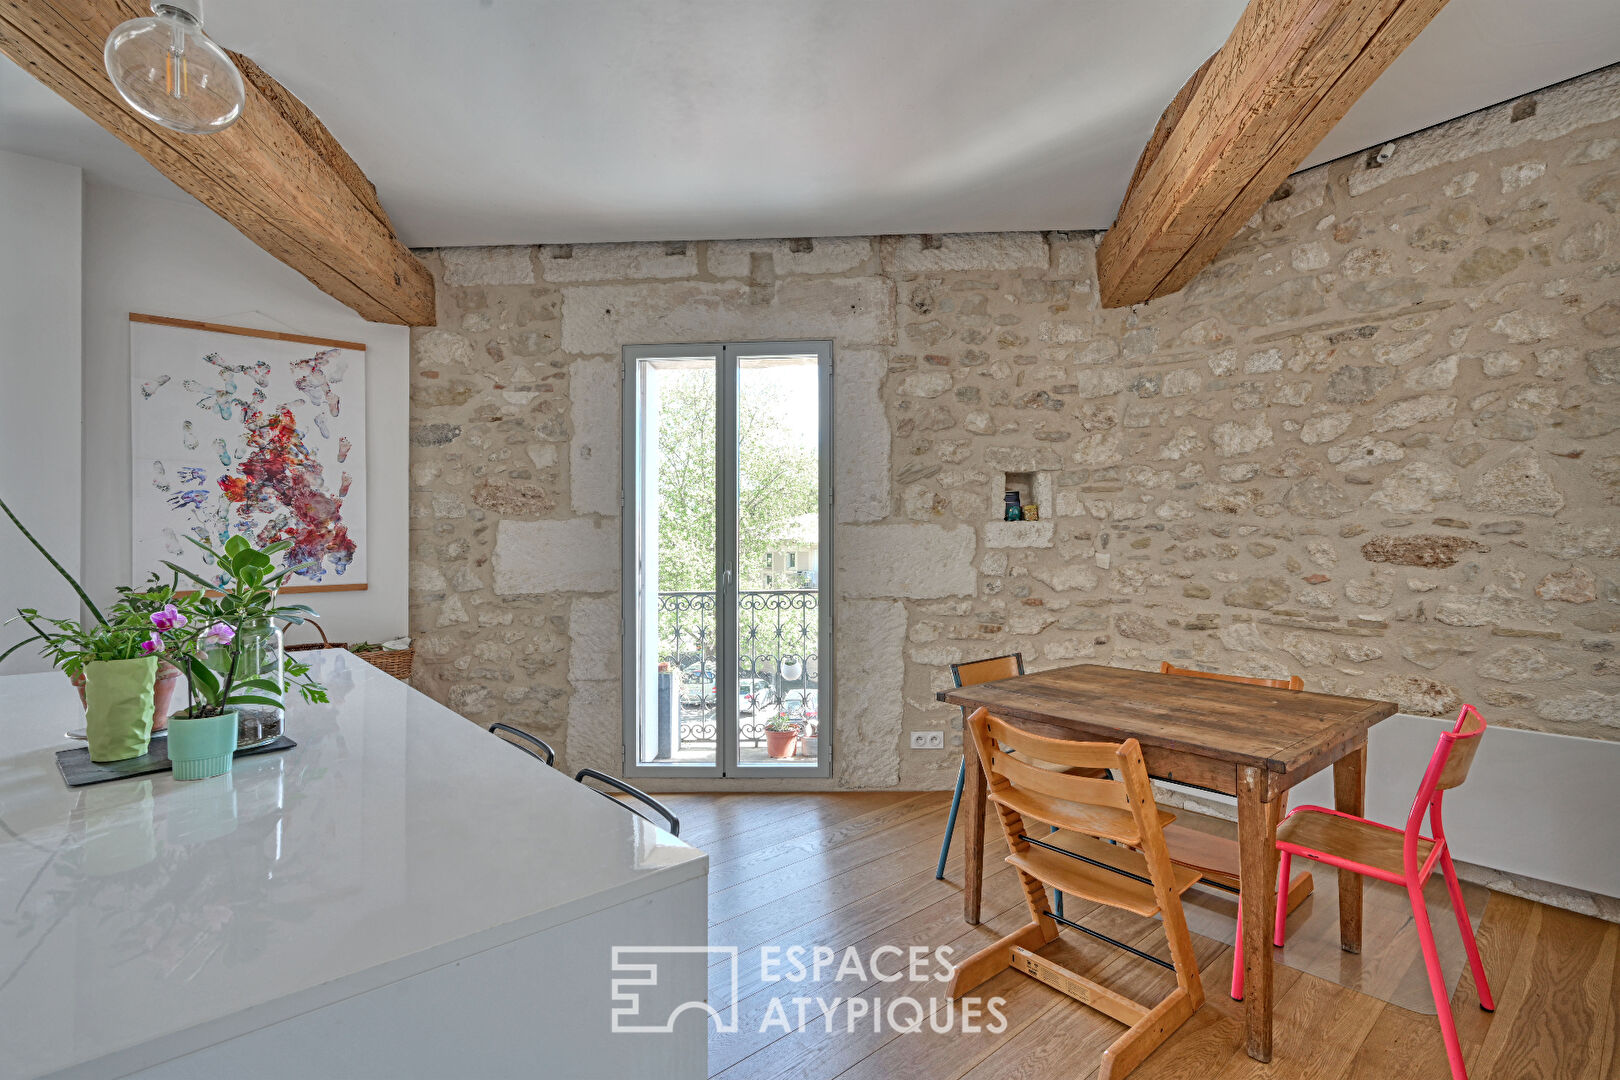 Superb renovated apartment in Montpellier